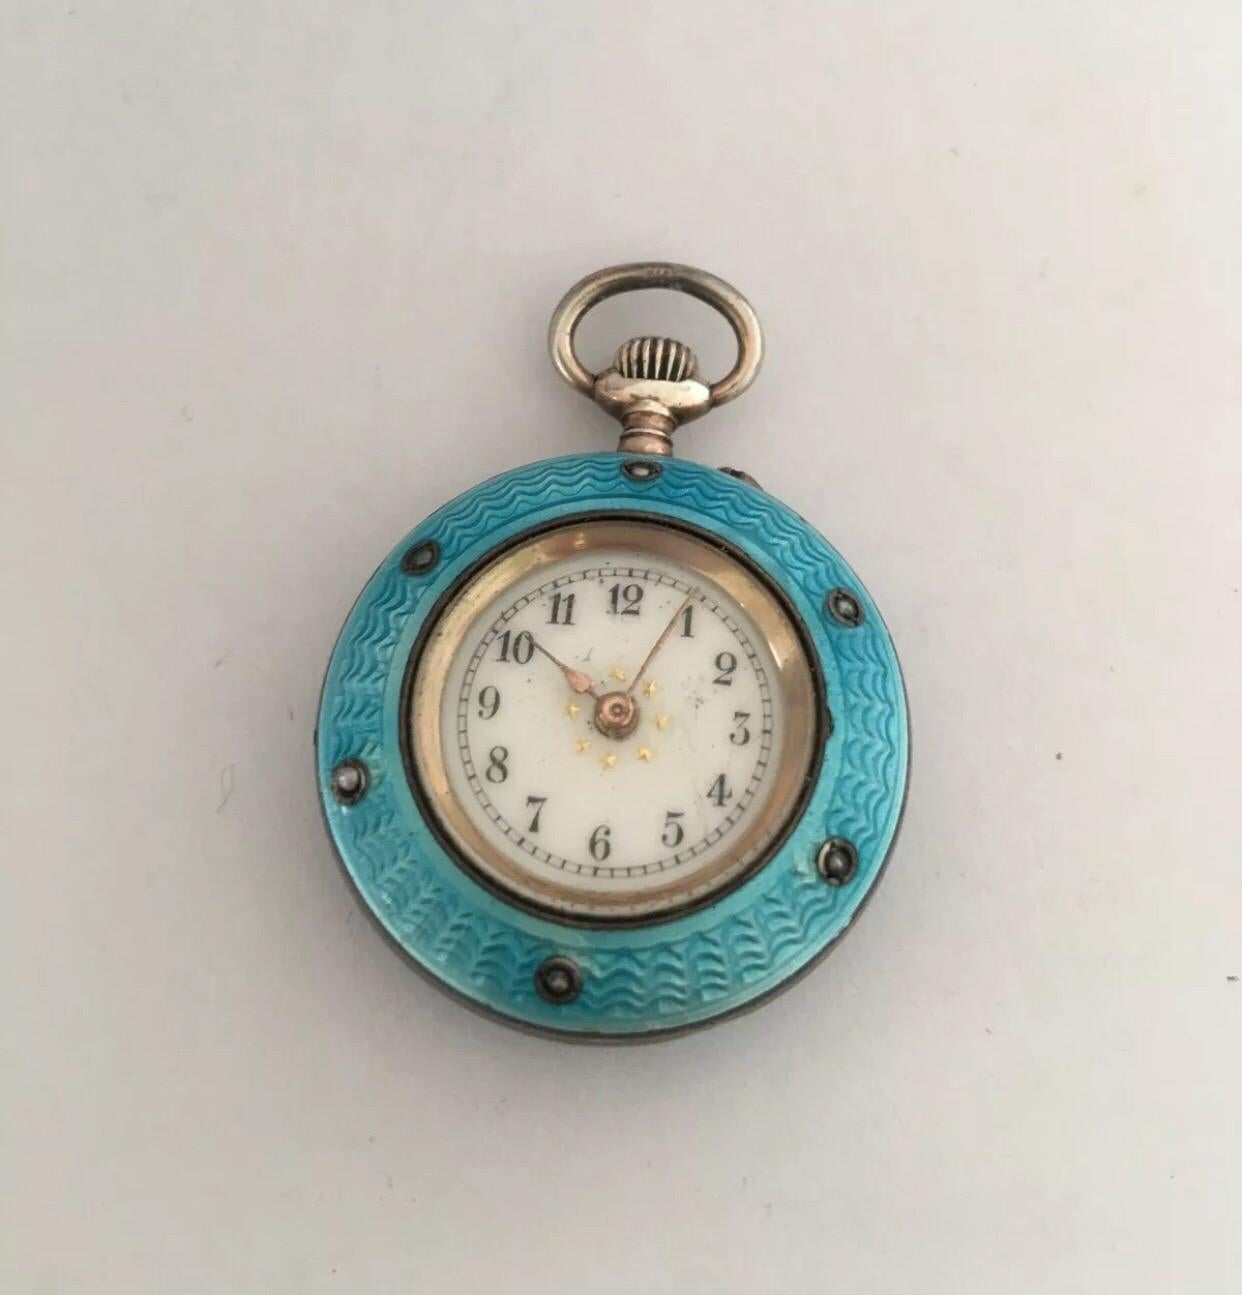 Antique Turquoise or Blue Enamel Silver Fob Watch 2